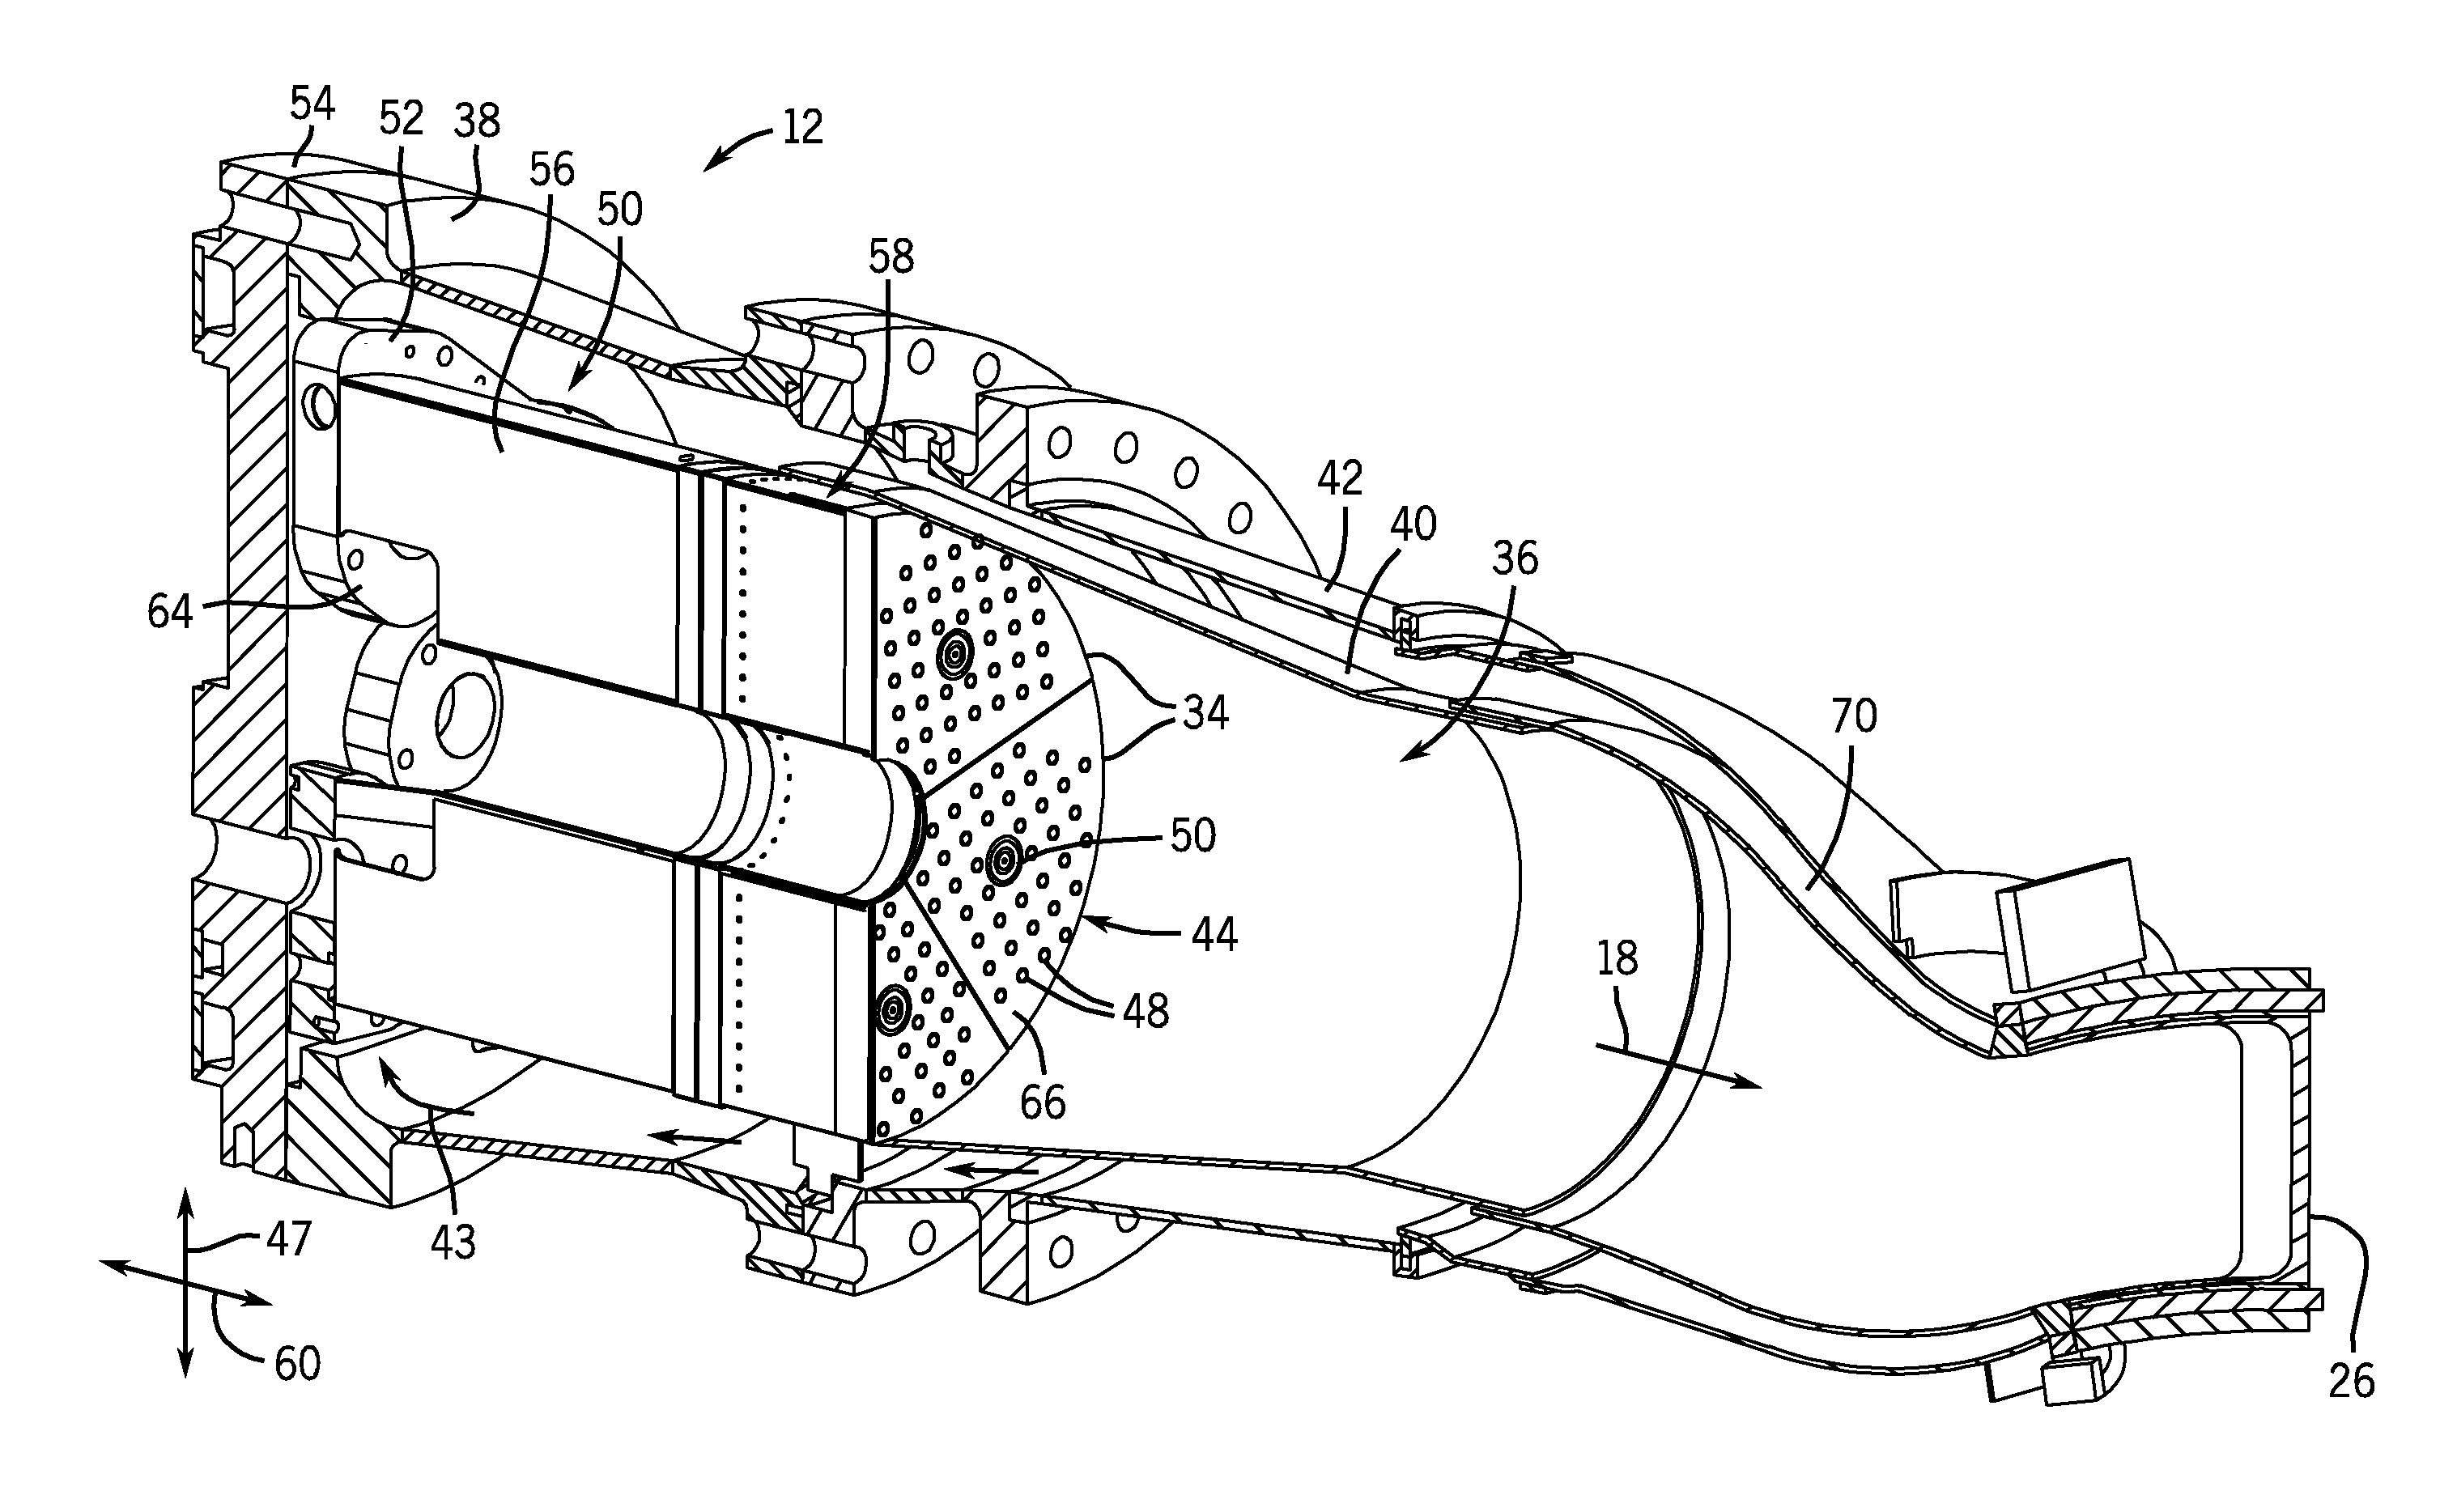 Fuel nozzles for injecting fuel in a gas turbine combustor